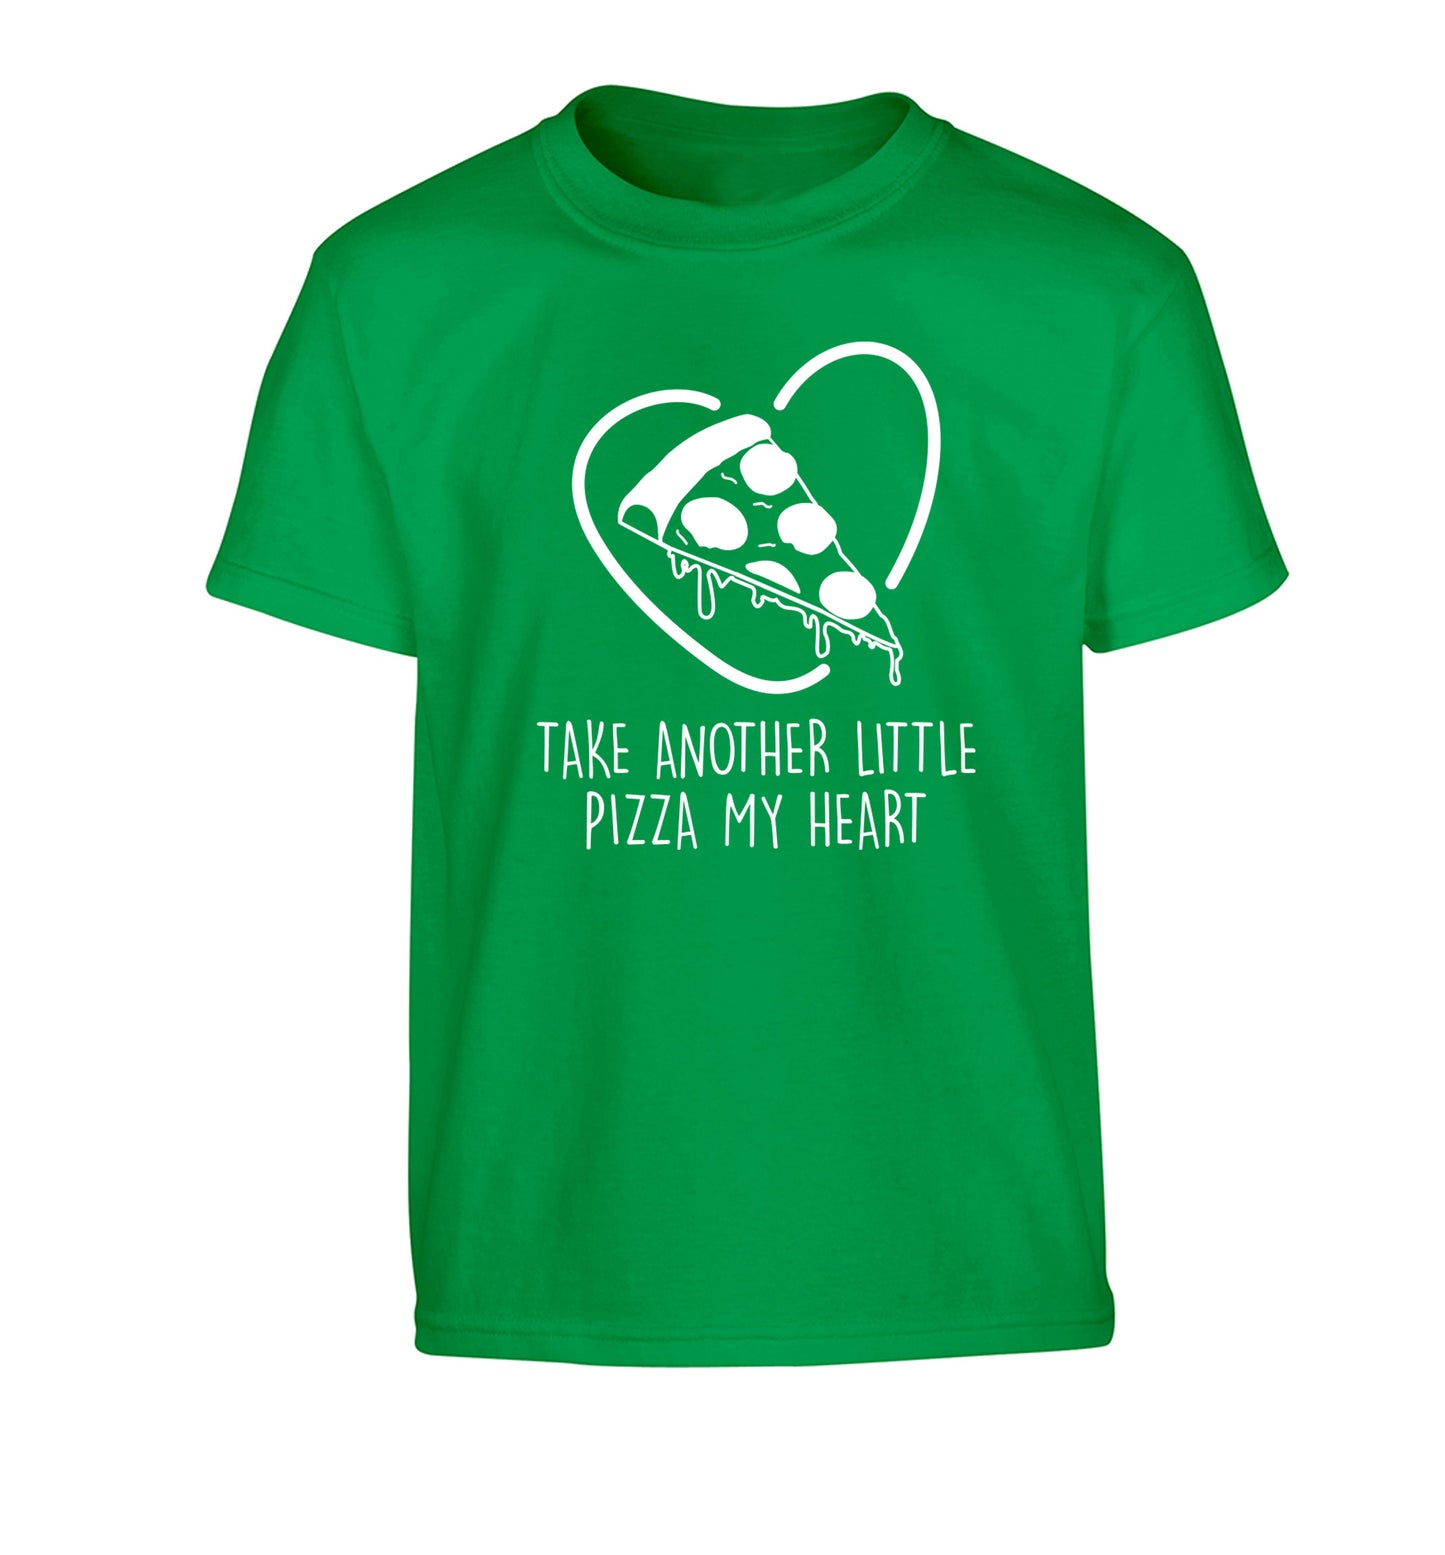 Take another little pizza my heart Children's green Tshirt 12-13 Years